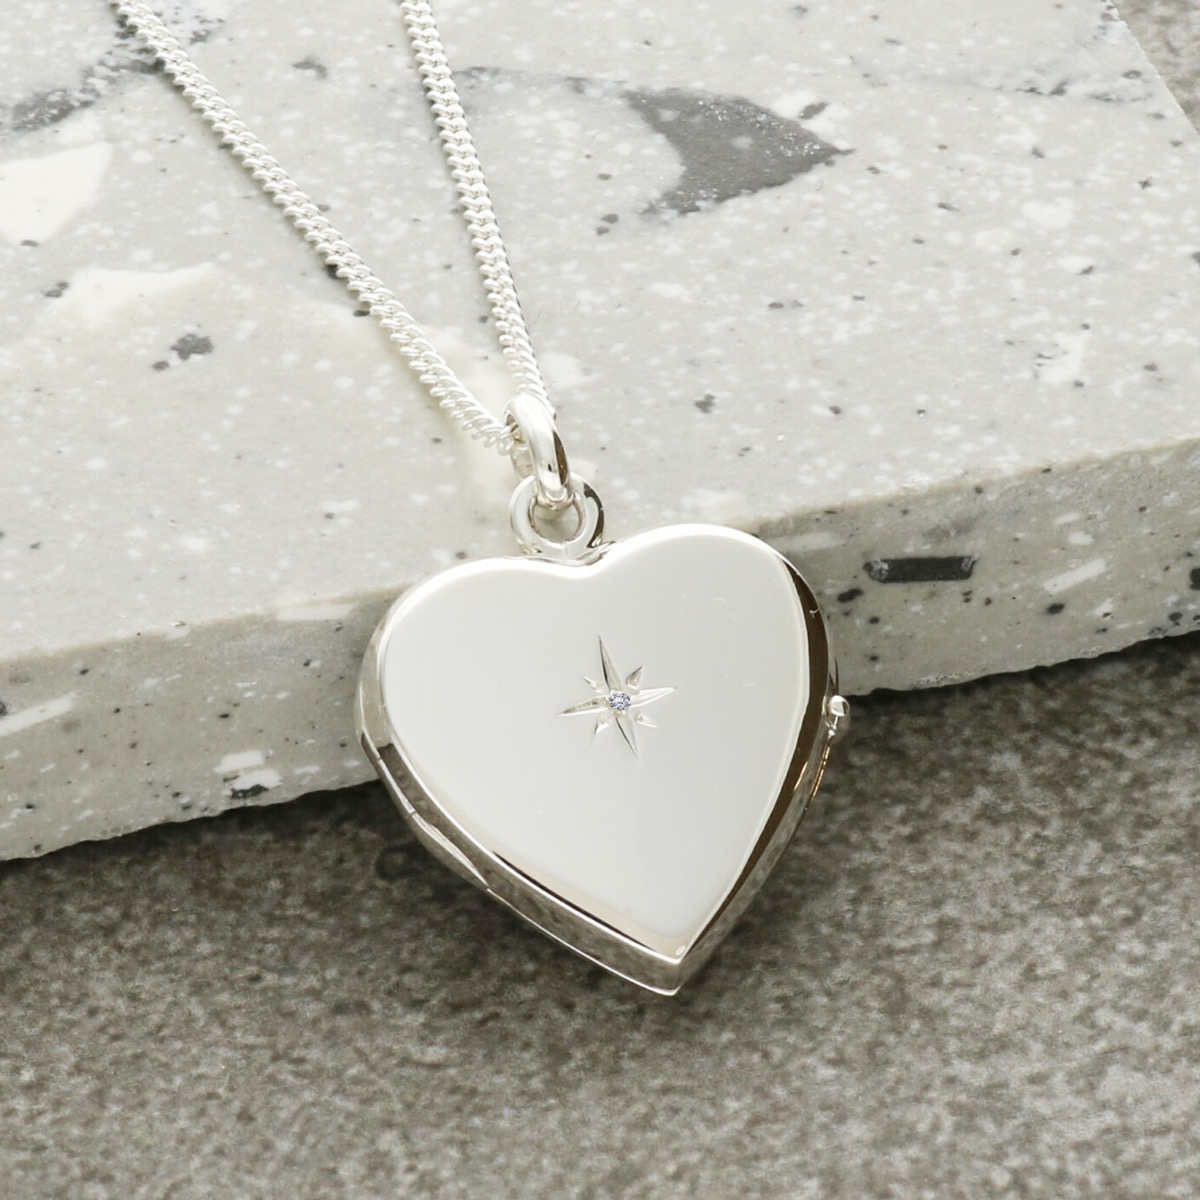 Sterling Silver Heart Locket Set With Diamond With Optional Engraving & Chain